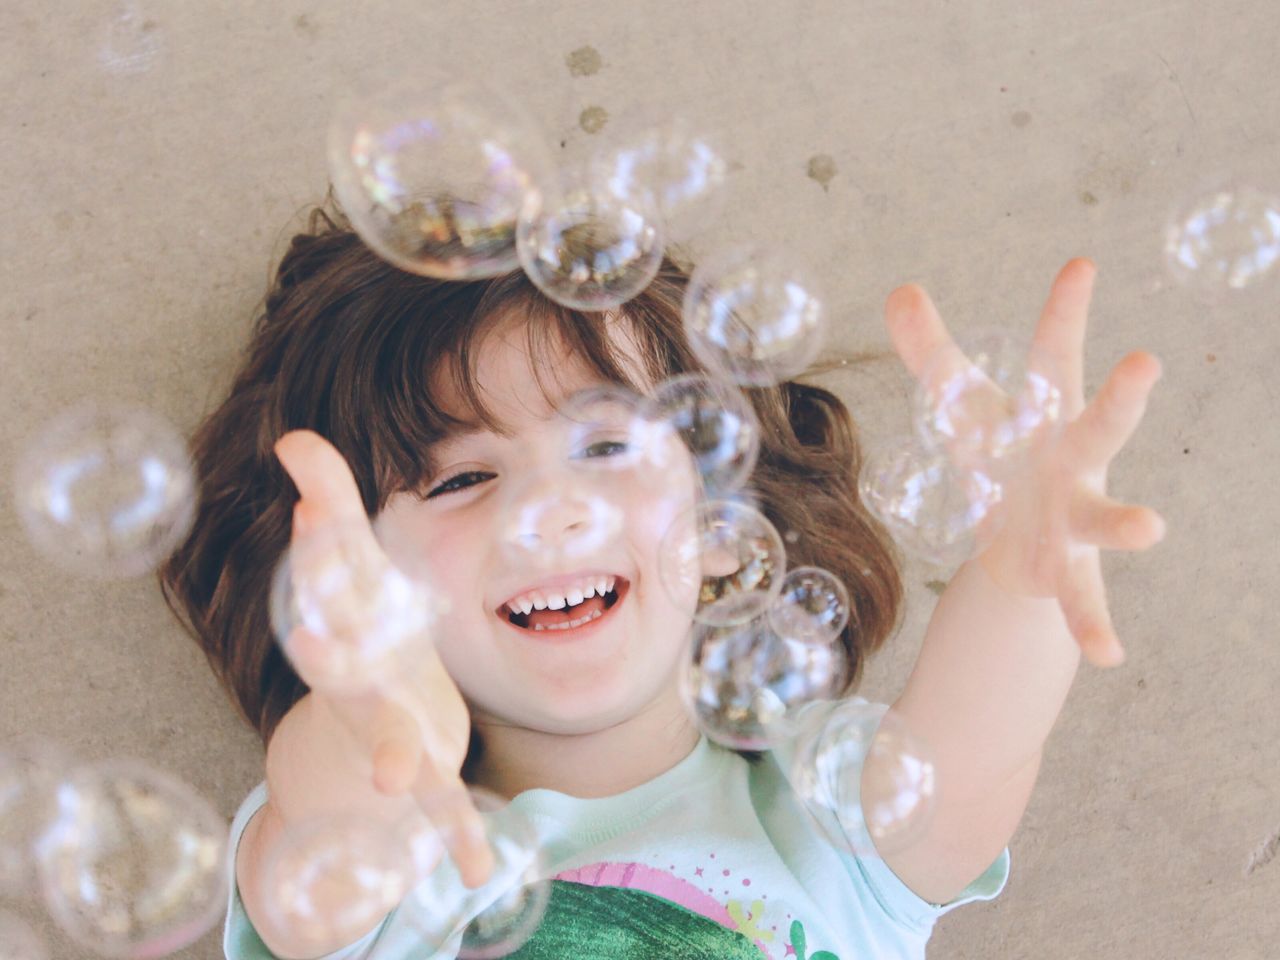 Close-up portrait of smiling girl playing with bubbles